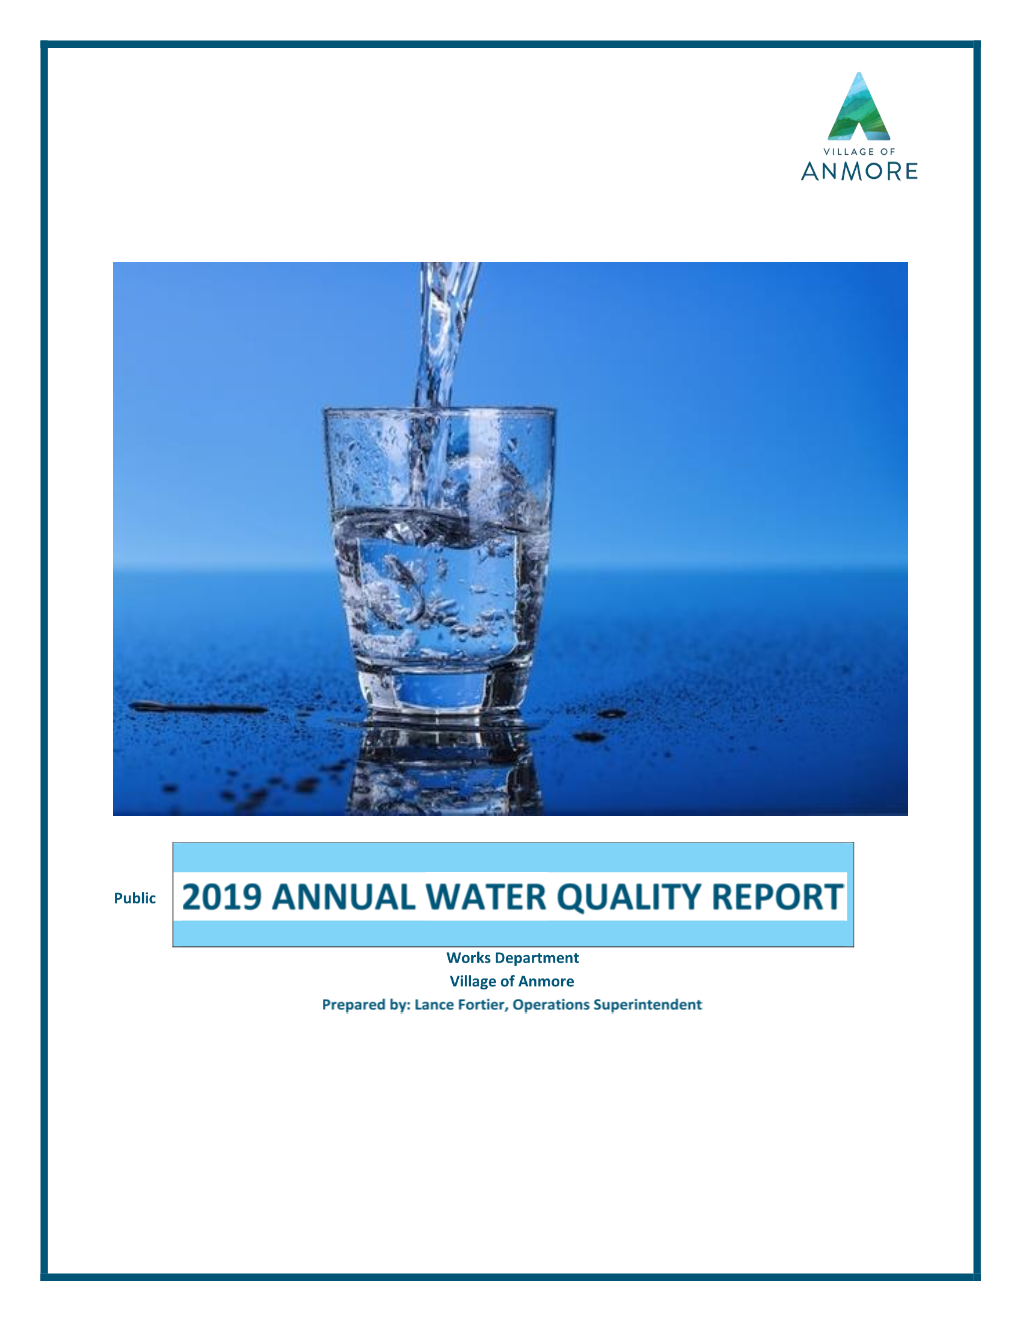 Annual Water Quality Report 2019